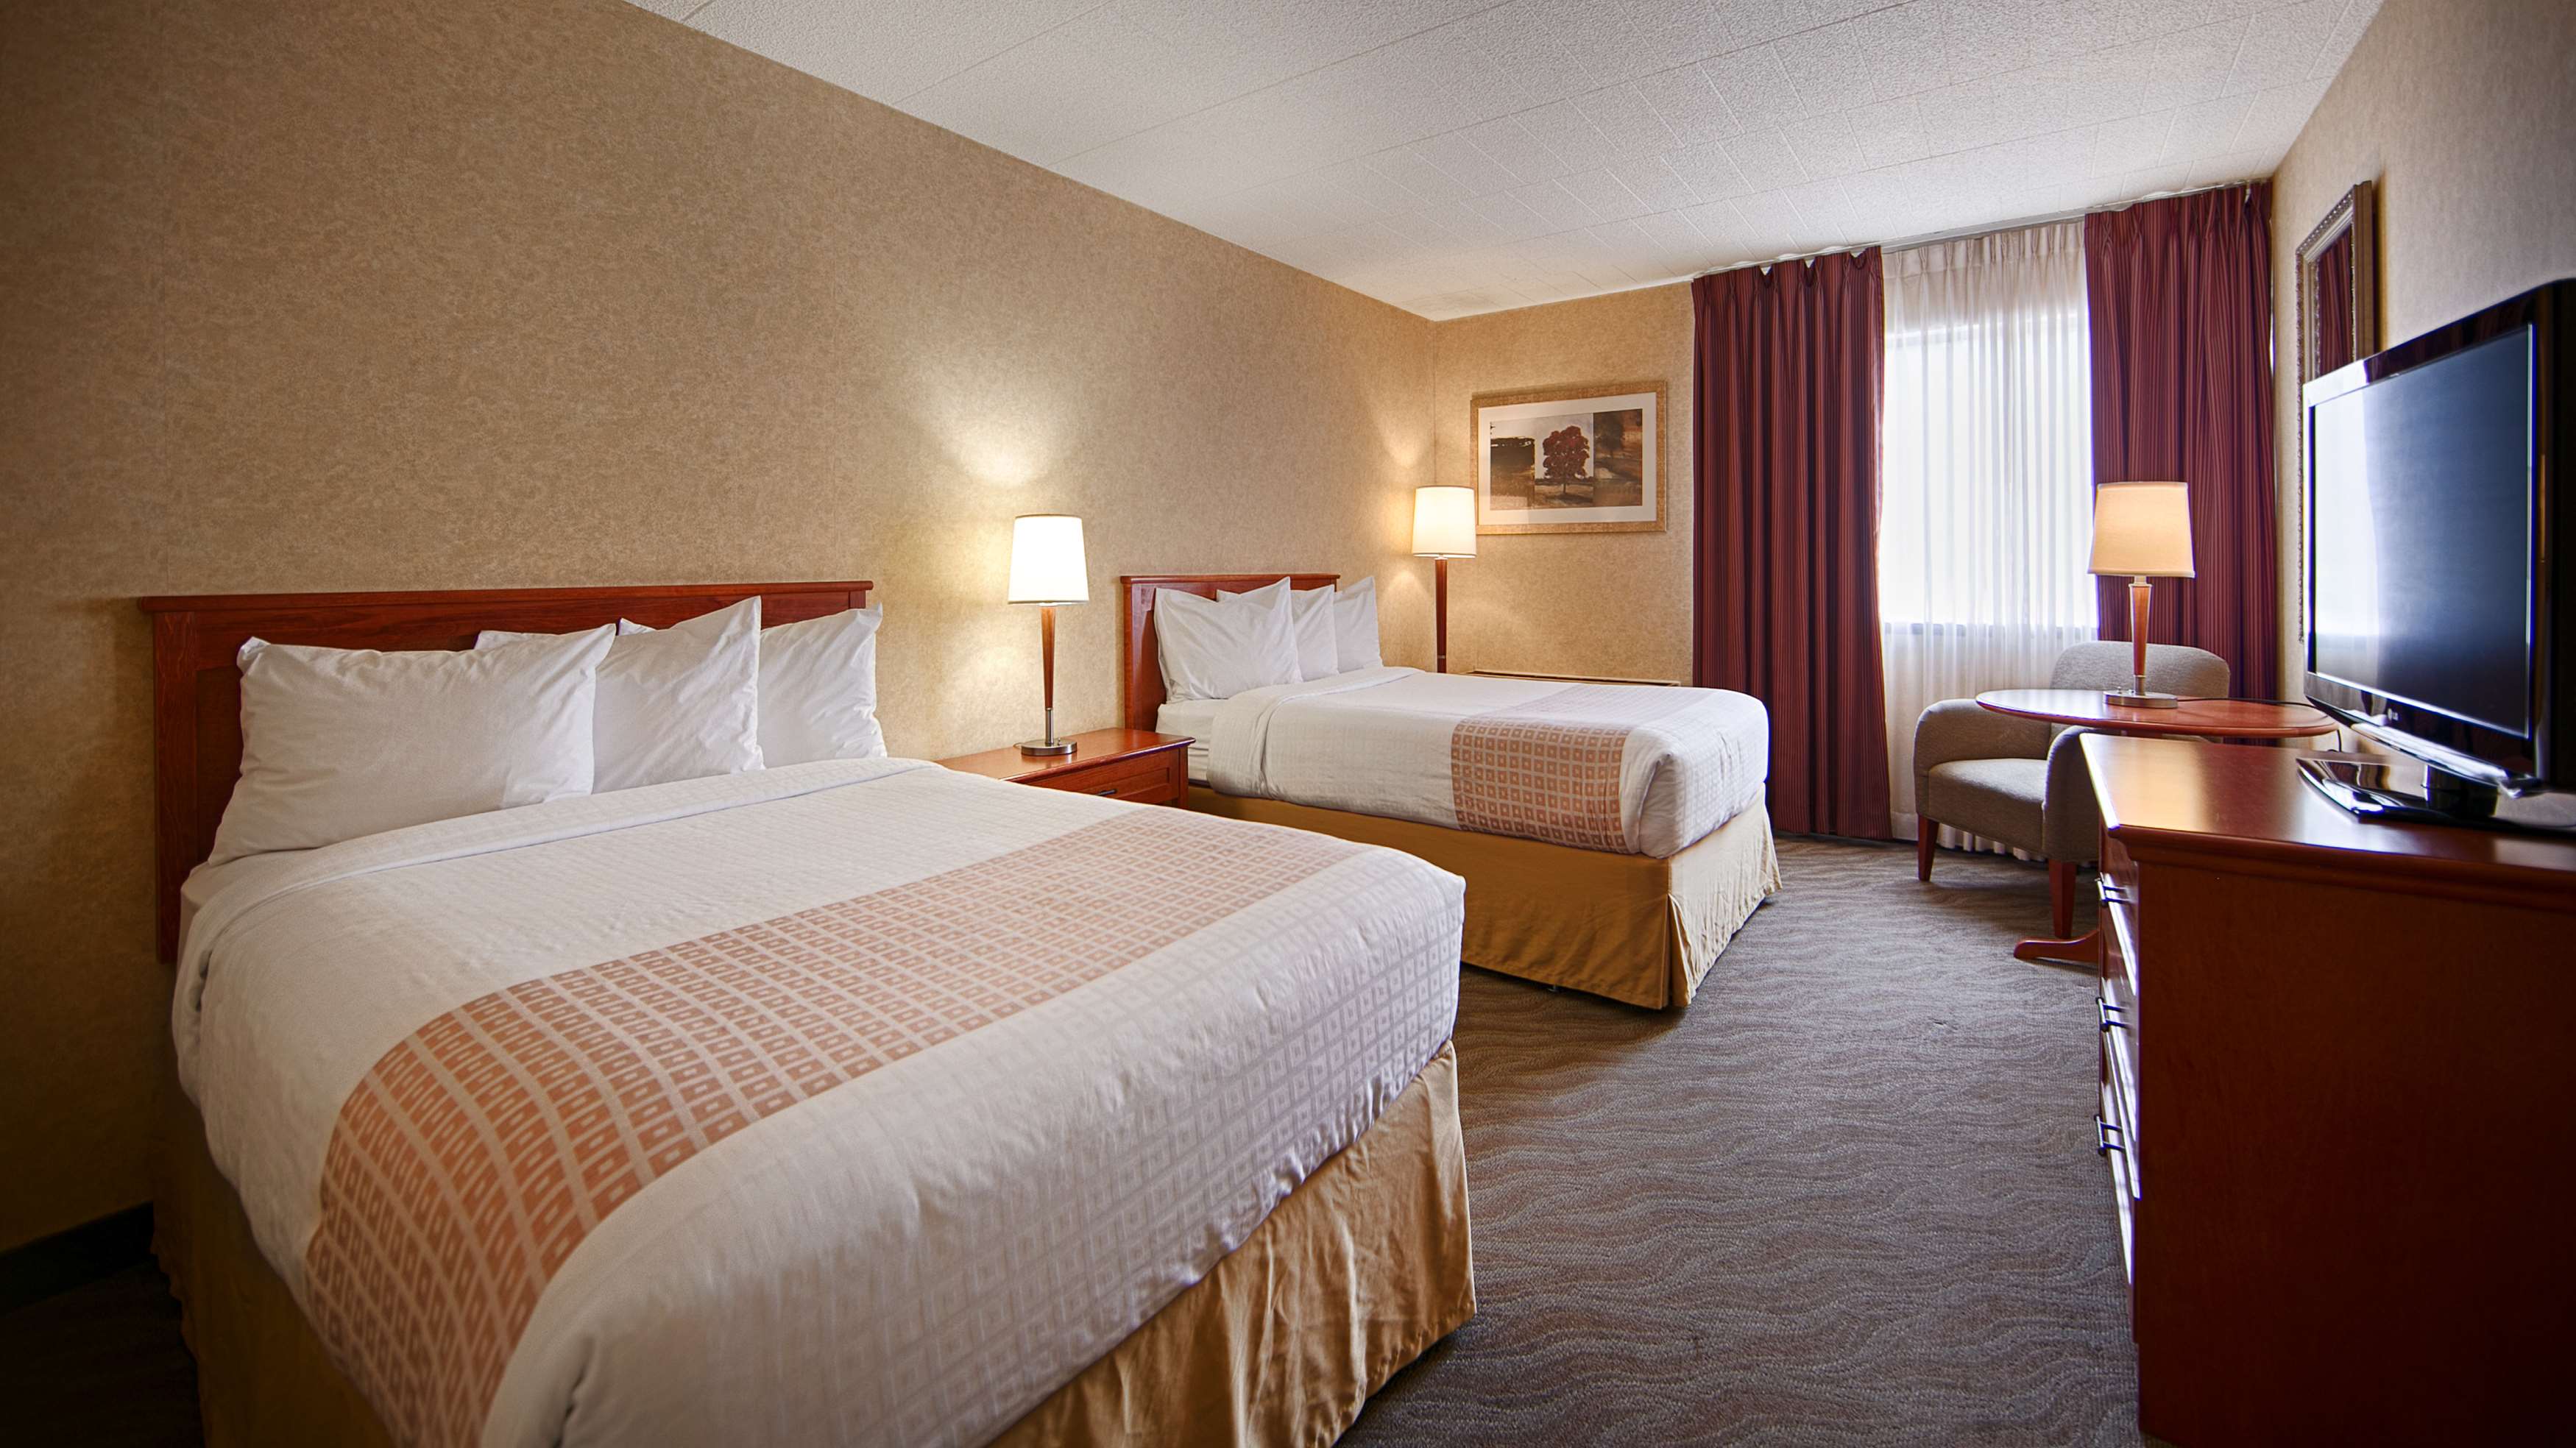 Two Double Beds Guest Room Best Western North Bay Hotel & Conference Centre North Bay (705)474-5800